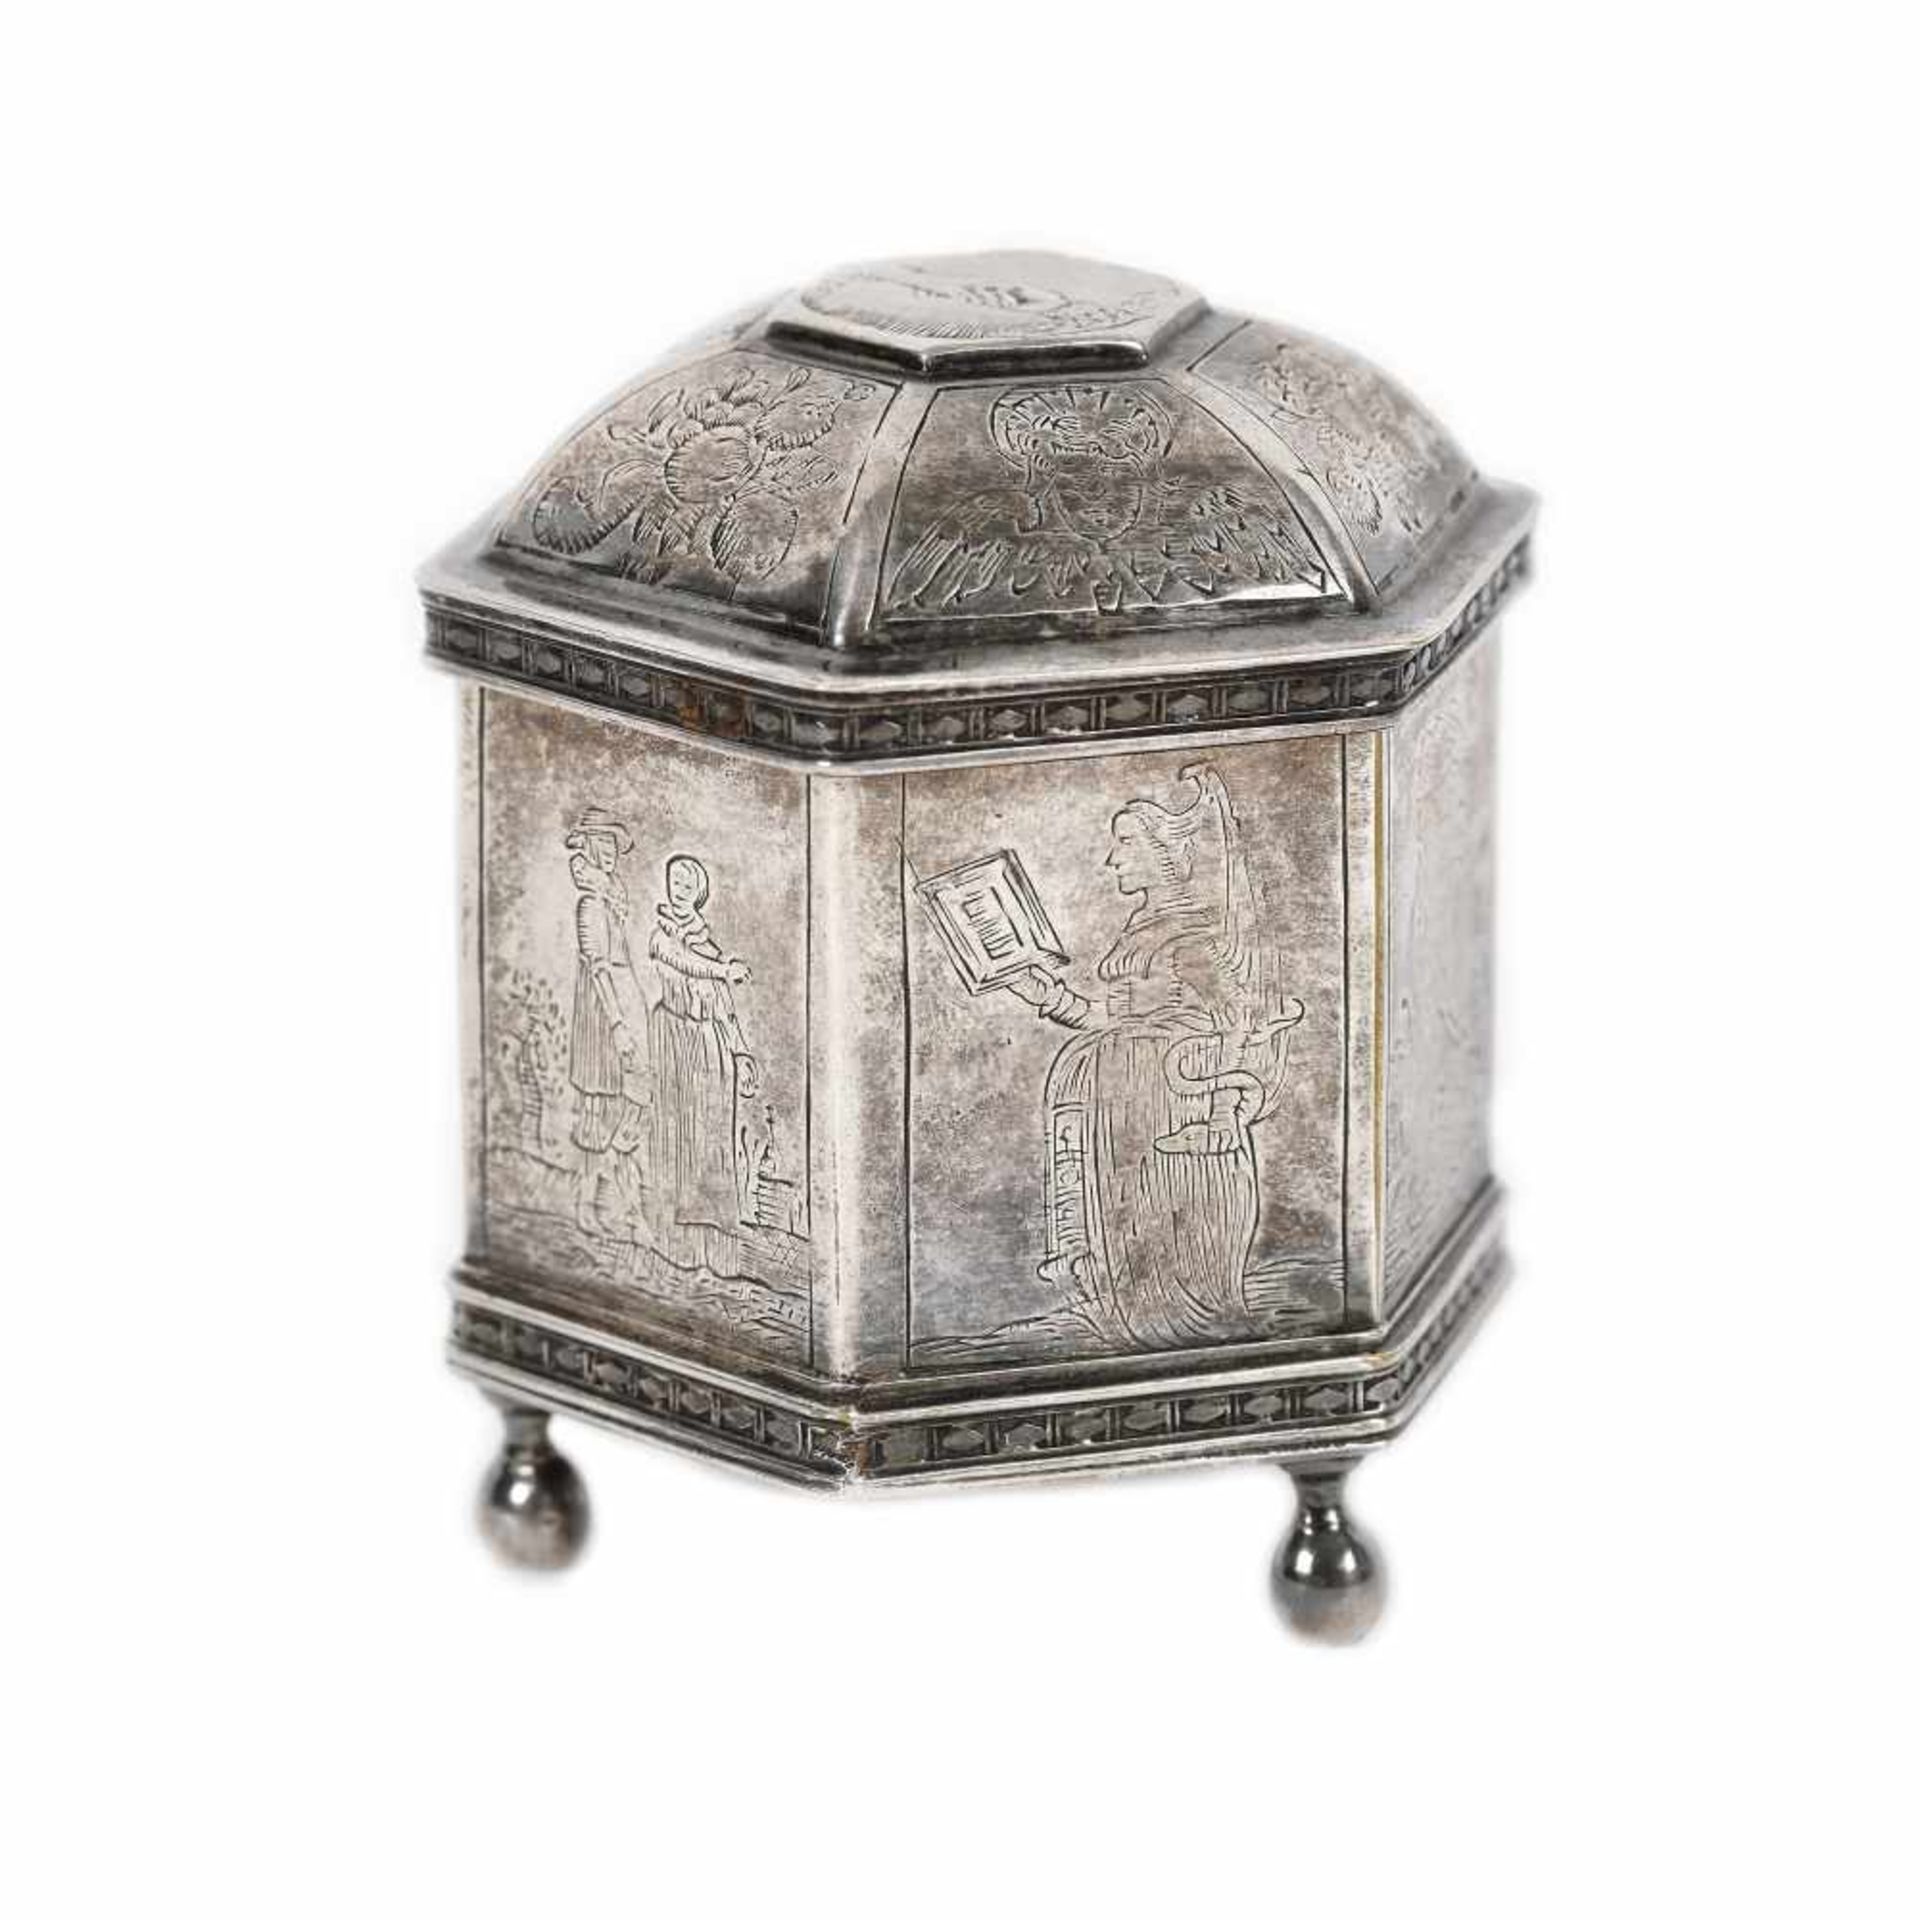 Partially gilded silver box, decorated with Masonic insignia, Great Britain, early 20th century - Bild 3 aus 4